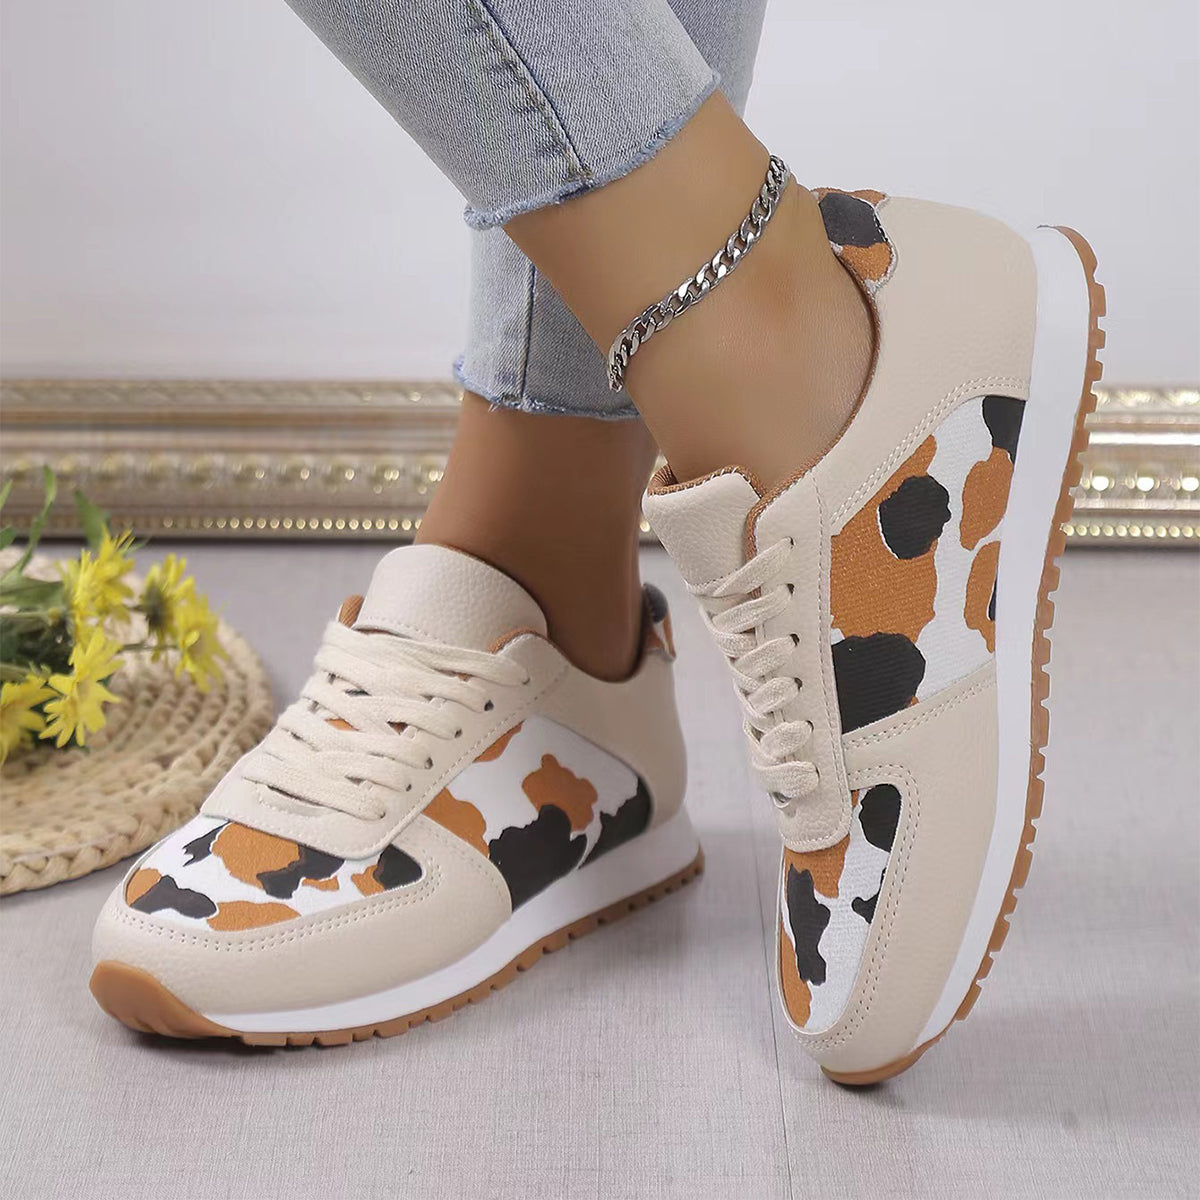 WILKYsWomen ShoesFashion Leopard Print Lace-up Sports Shoes For Women Sneakers Casual RDo you love animal prints and comfortable shoes? If so, you will adore the Fashion Leopard Print Lace-up Sports Shoes from wilkysfitness.com!
These shoes are not onl